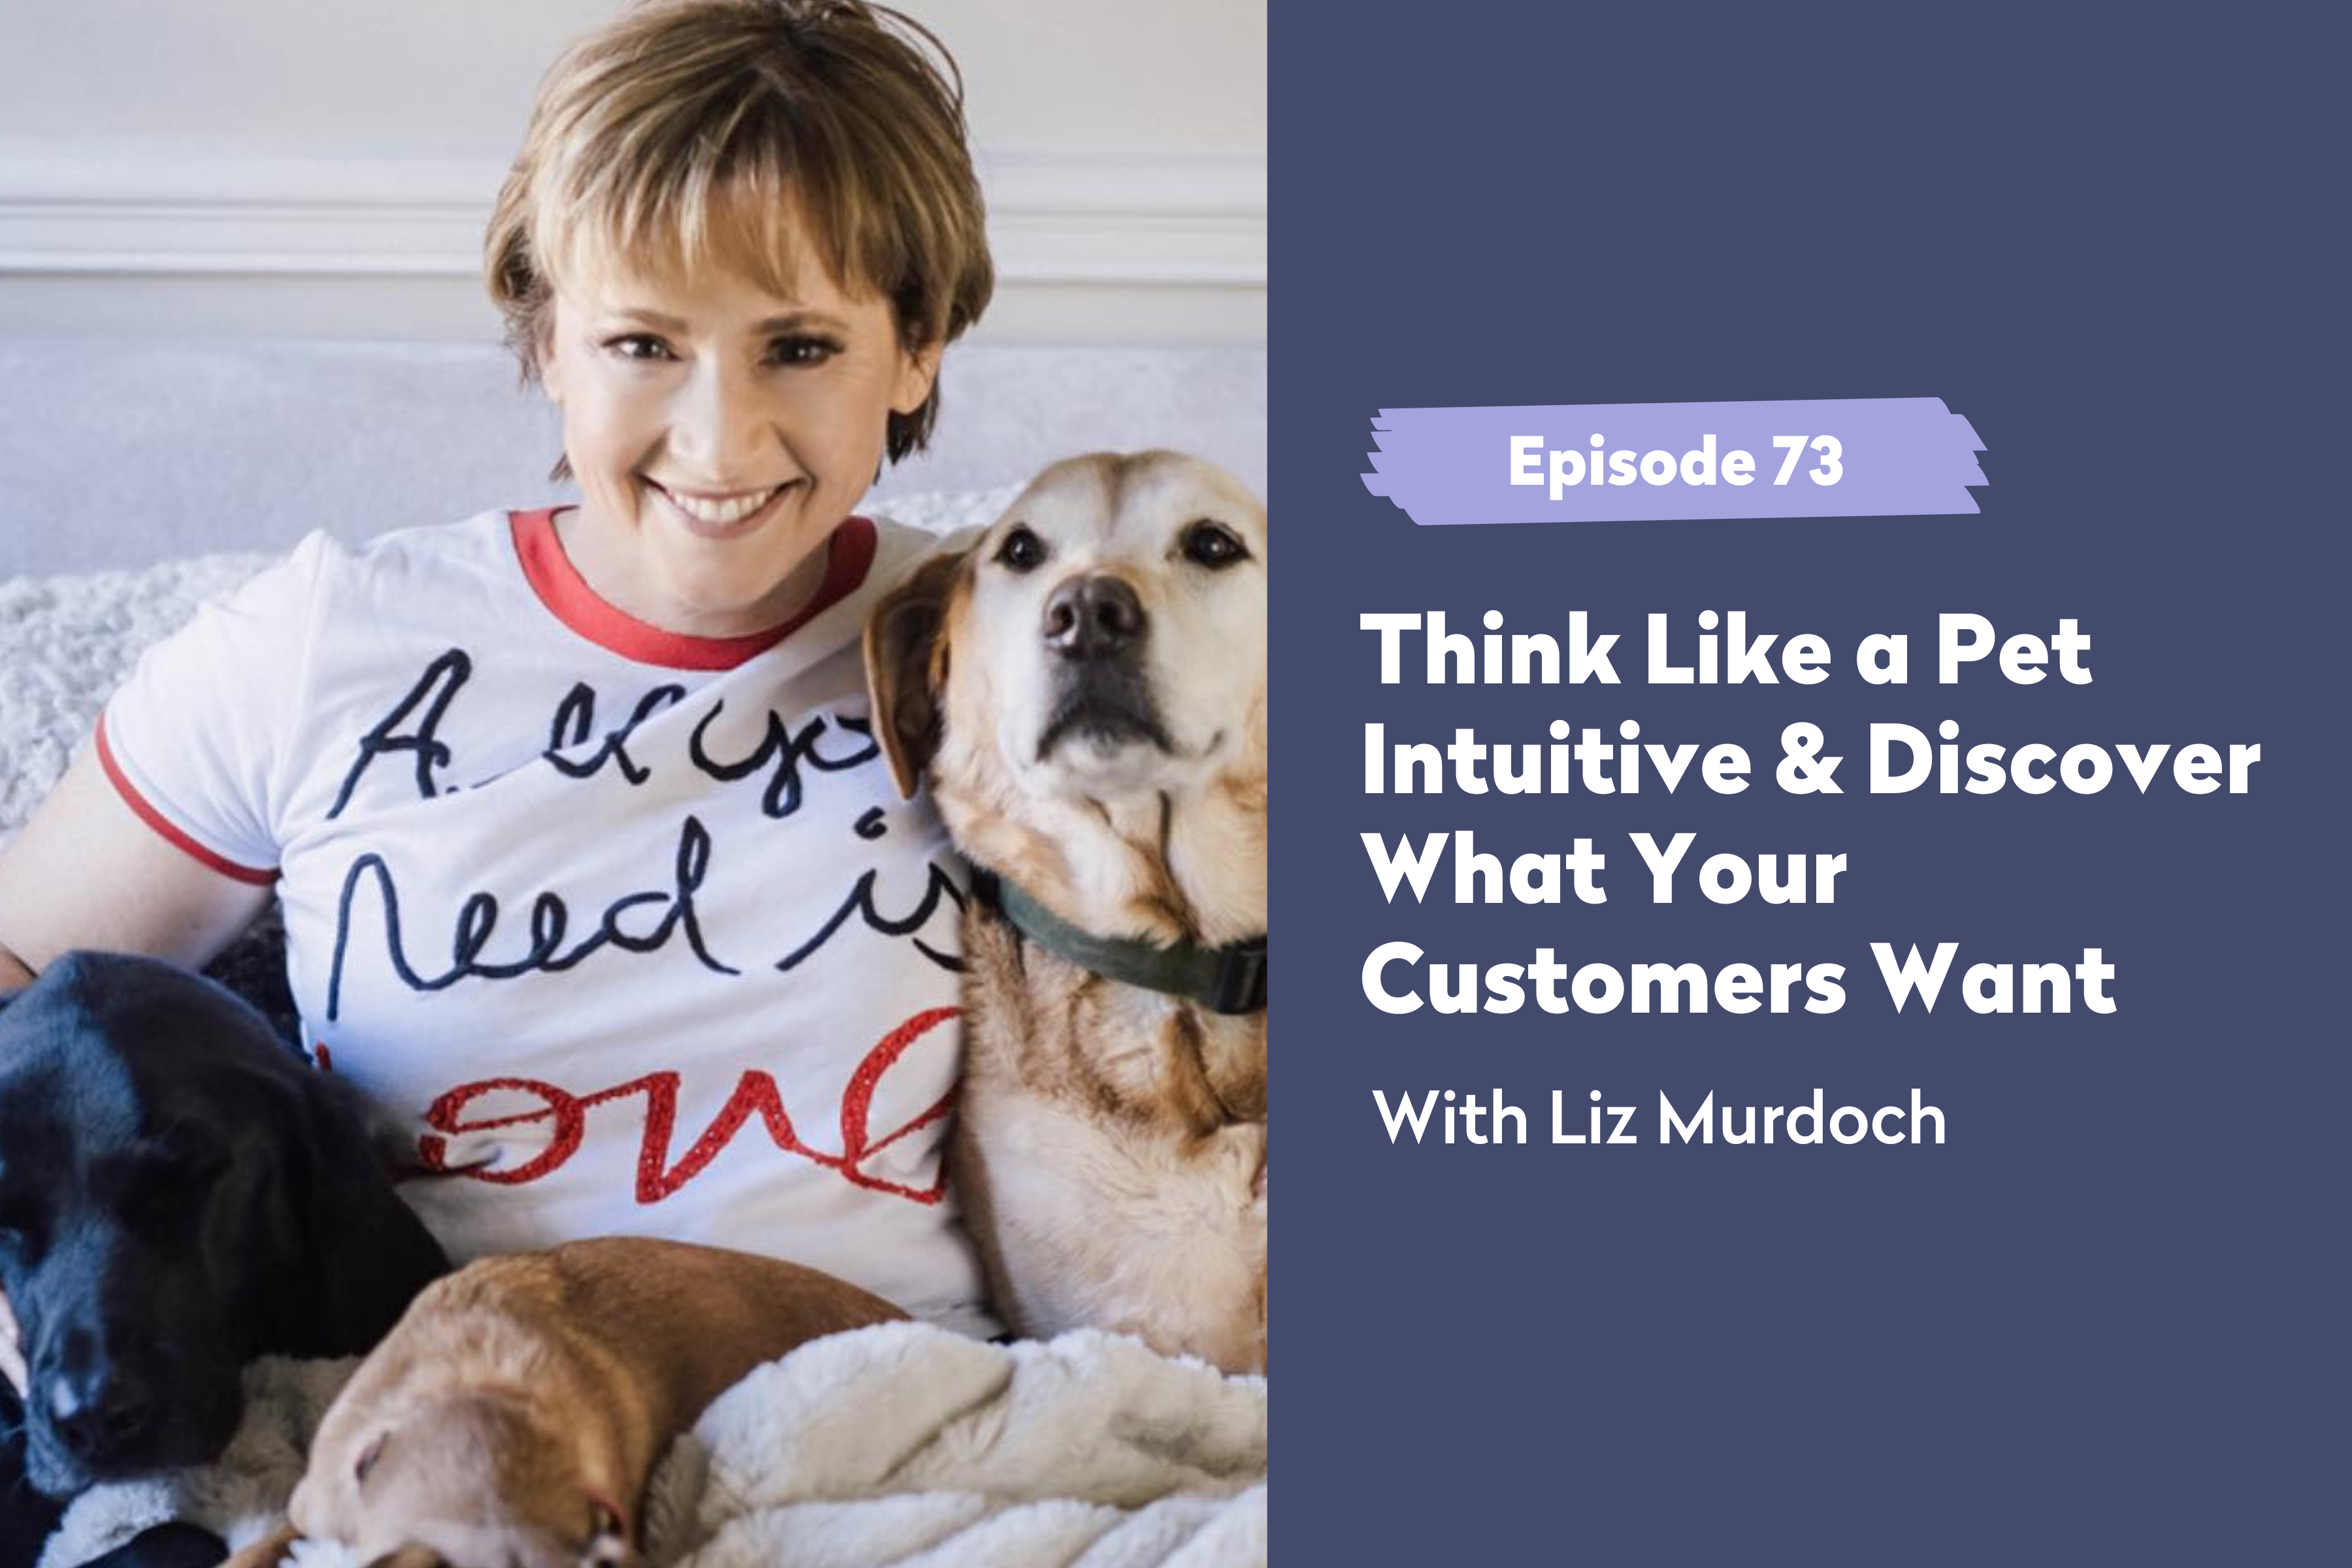 Episode 73 | Think Like a Pet Intuitive & Discover What Your Customers Want with Liz Murdoch